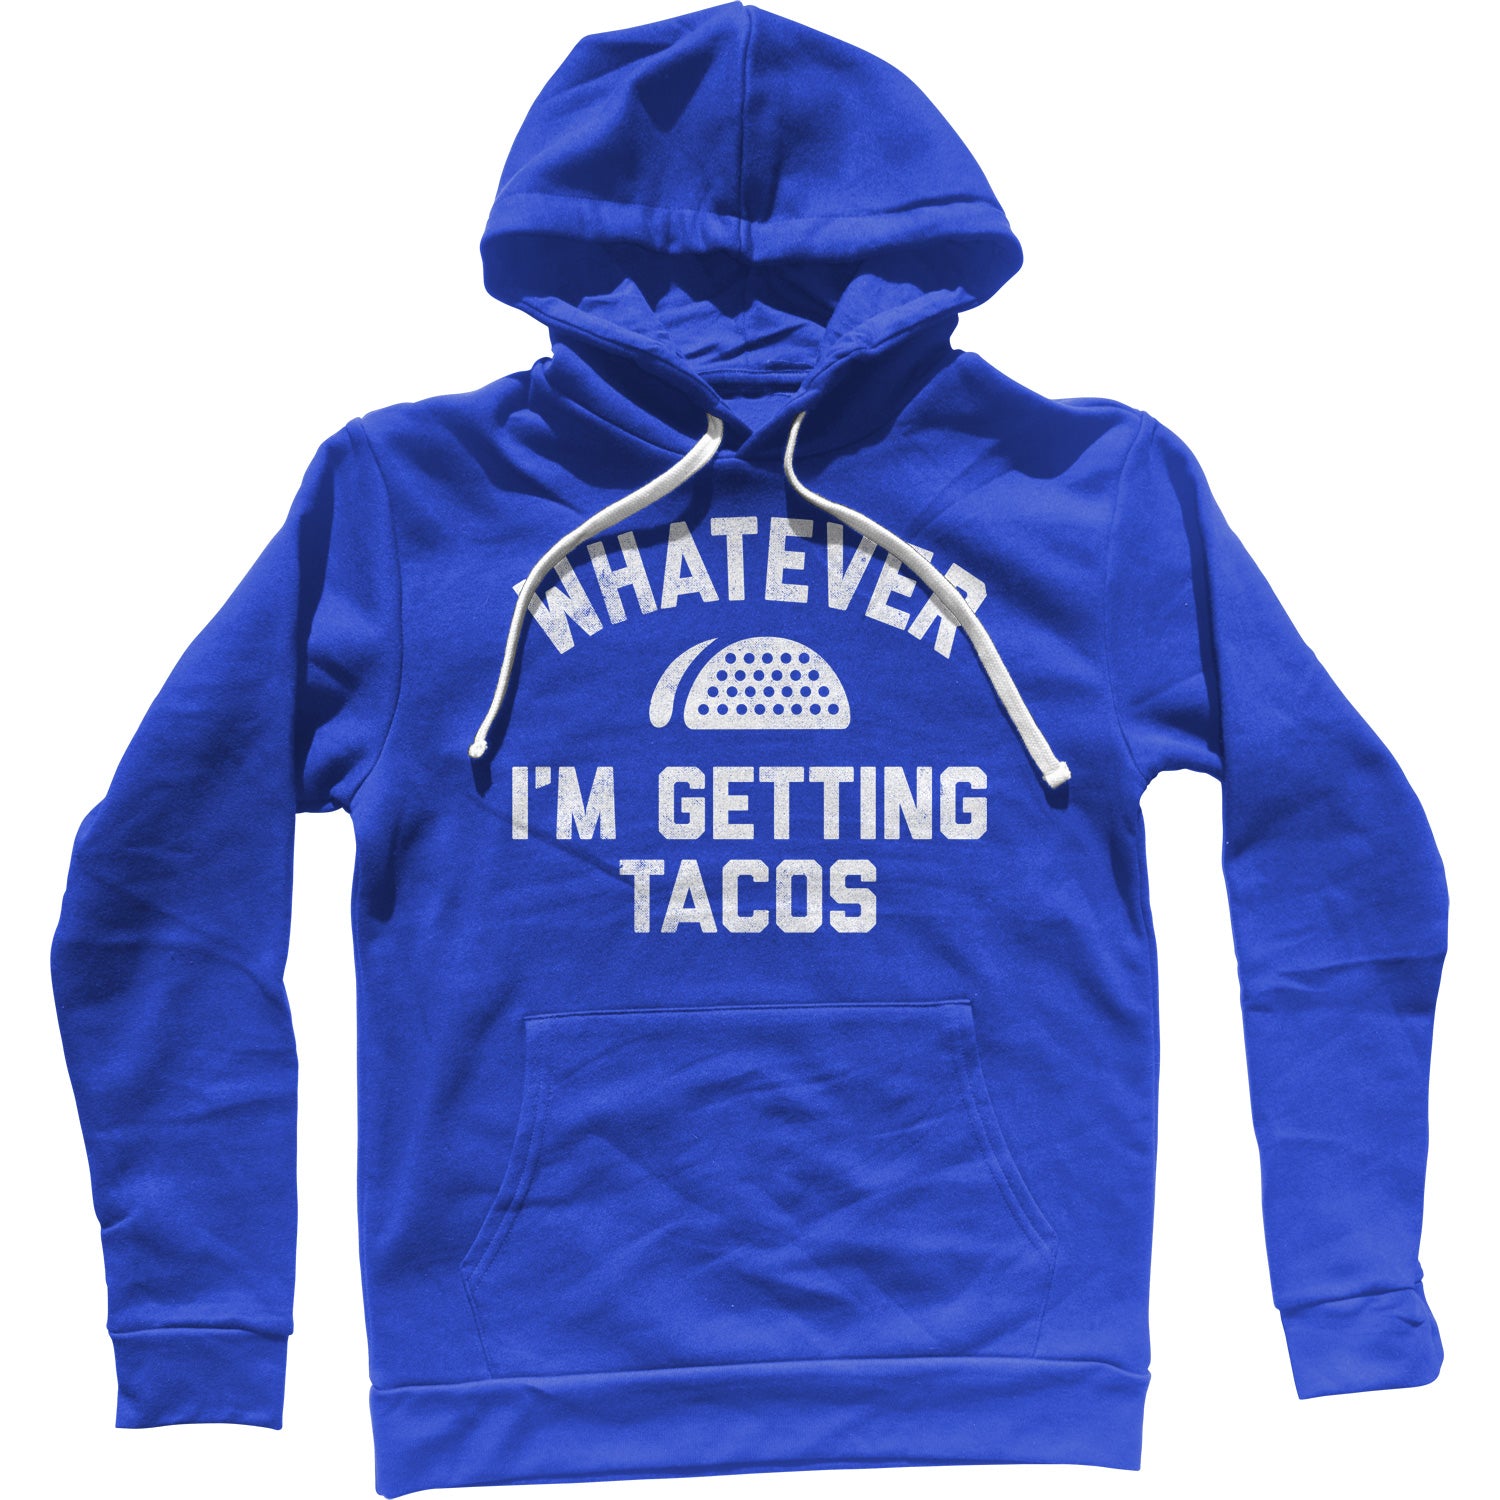 Whatever I'm Getting Tacos Unisex Hoodie